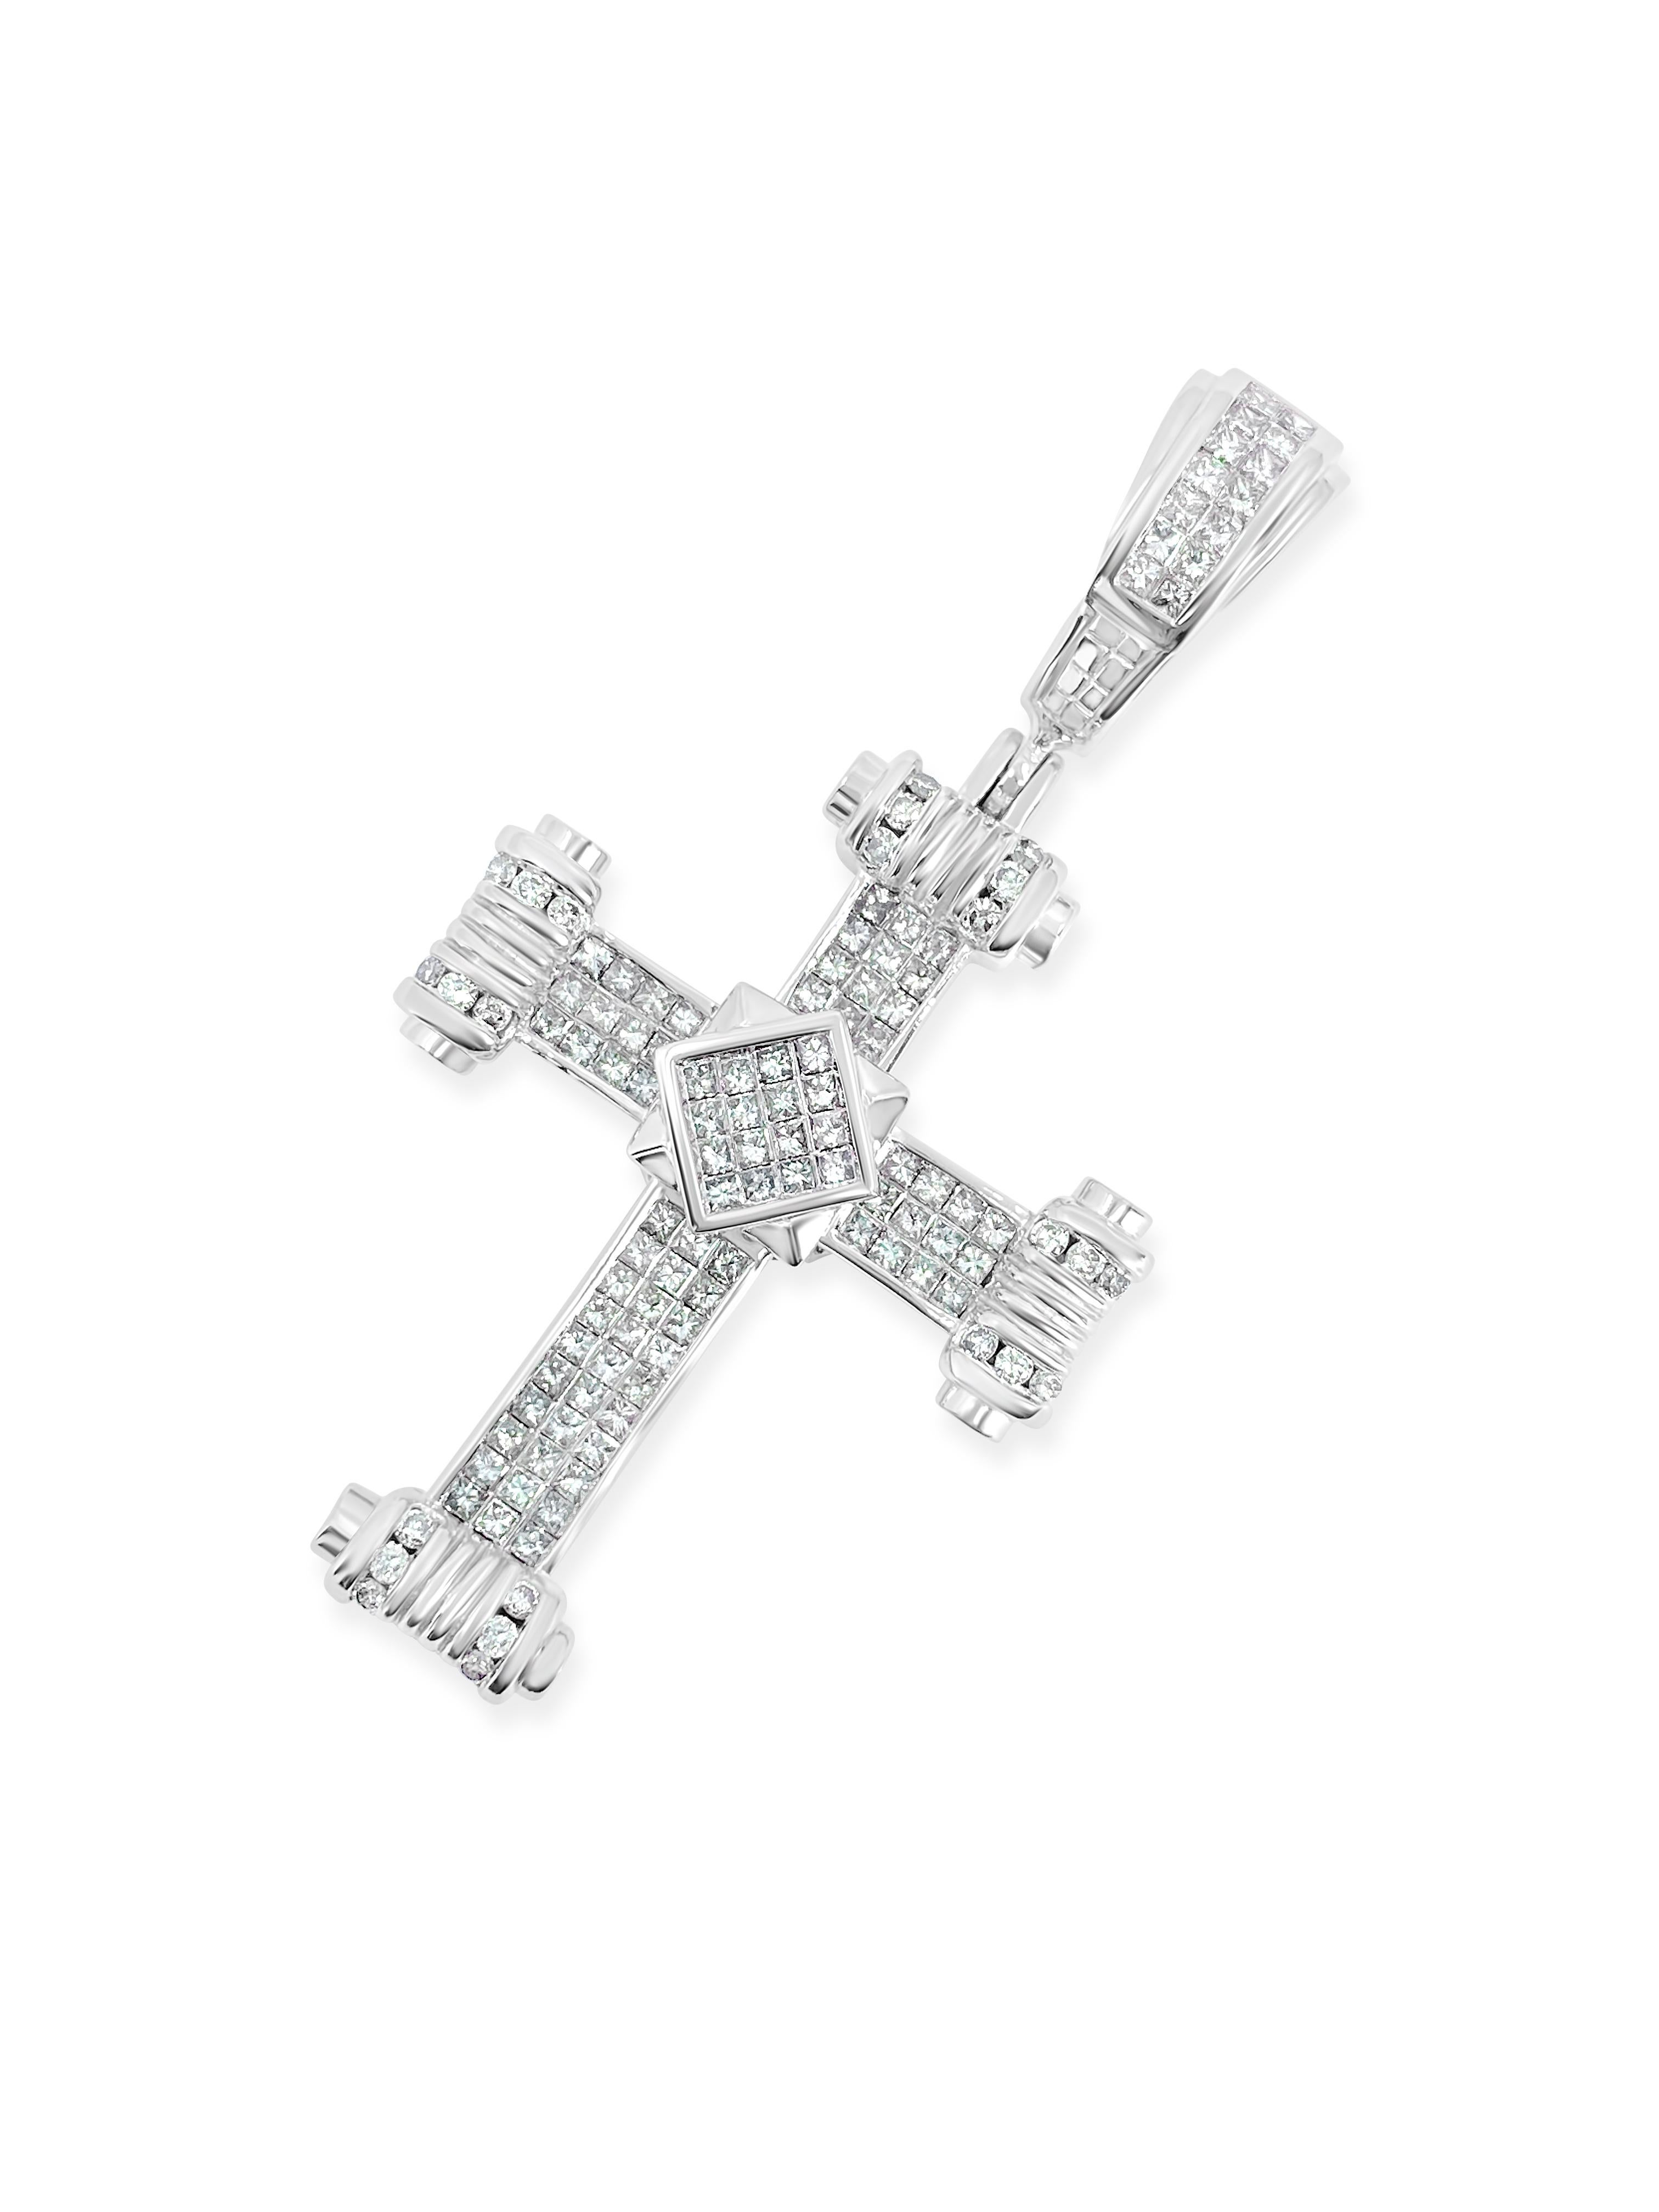 Crafted from exquisite 14k white gold, this stunning unisex religious diamond cross pendant features a total of 5.50 carats of meticulously selected diamonds. With a blend of princess and round brilliant cuts, these diamonds exhibit remarkable VS-SI